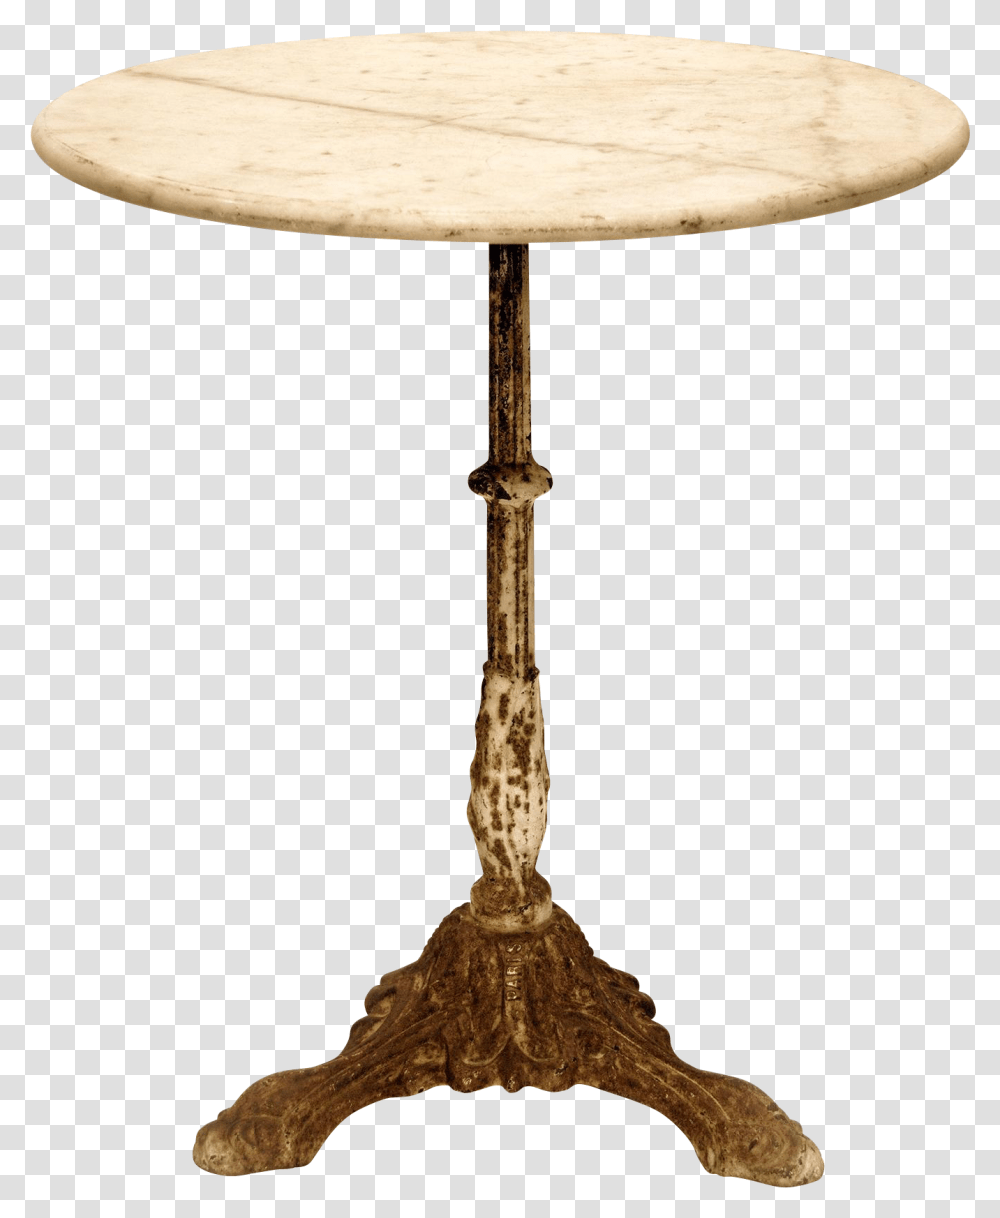 Original French Caf Table Outdoor Table, Lamp, Tabletop, Furniture, Bar Stool Transparent Png